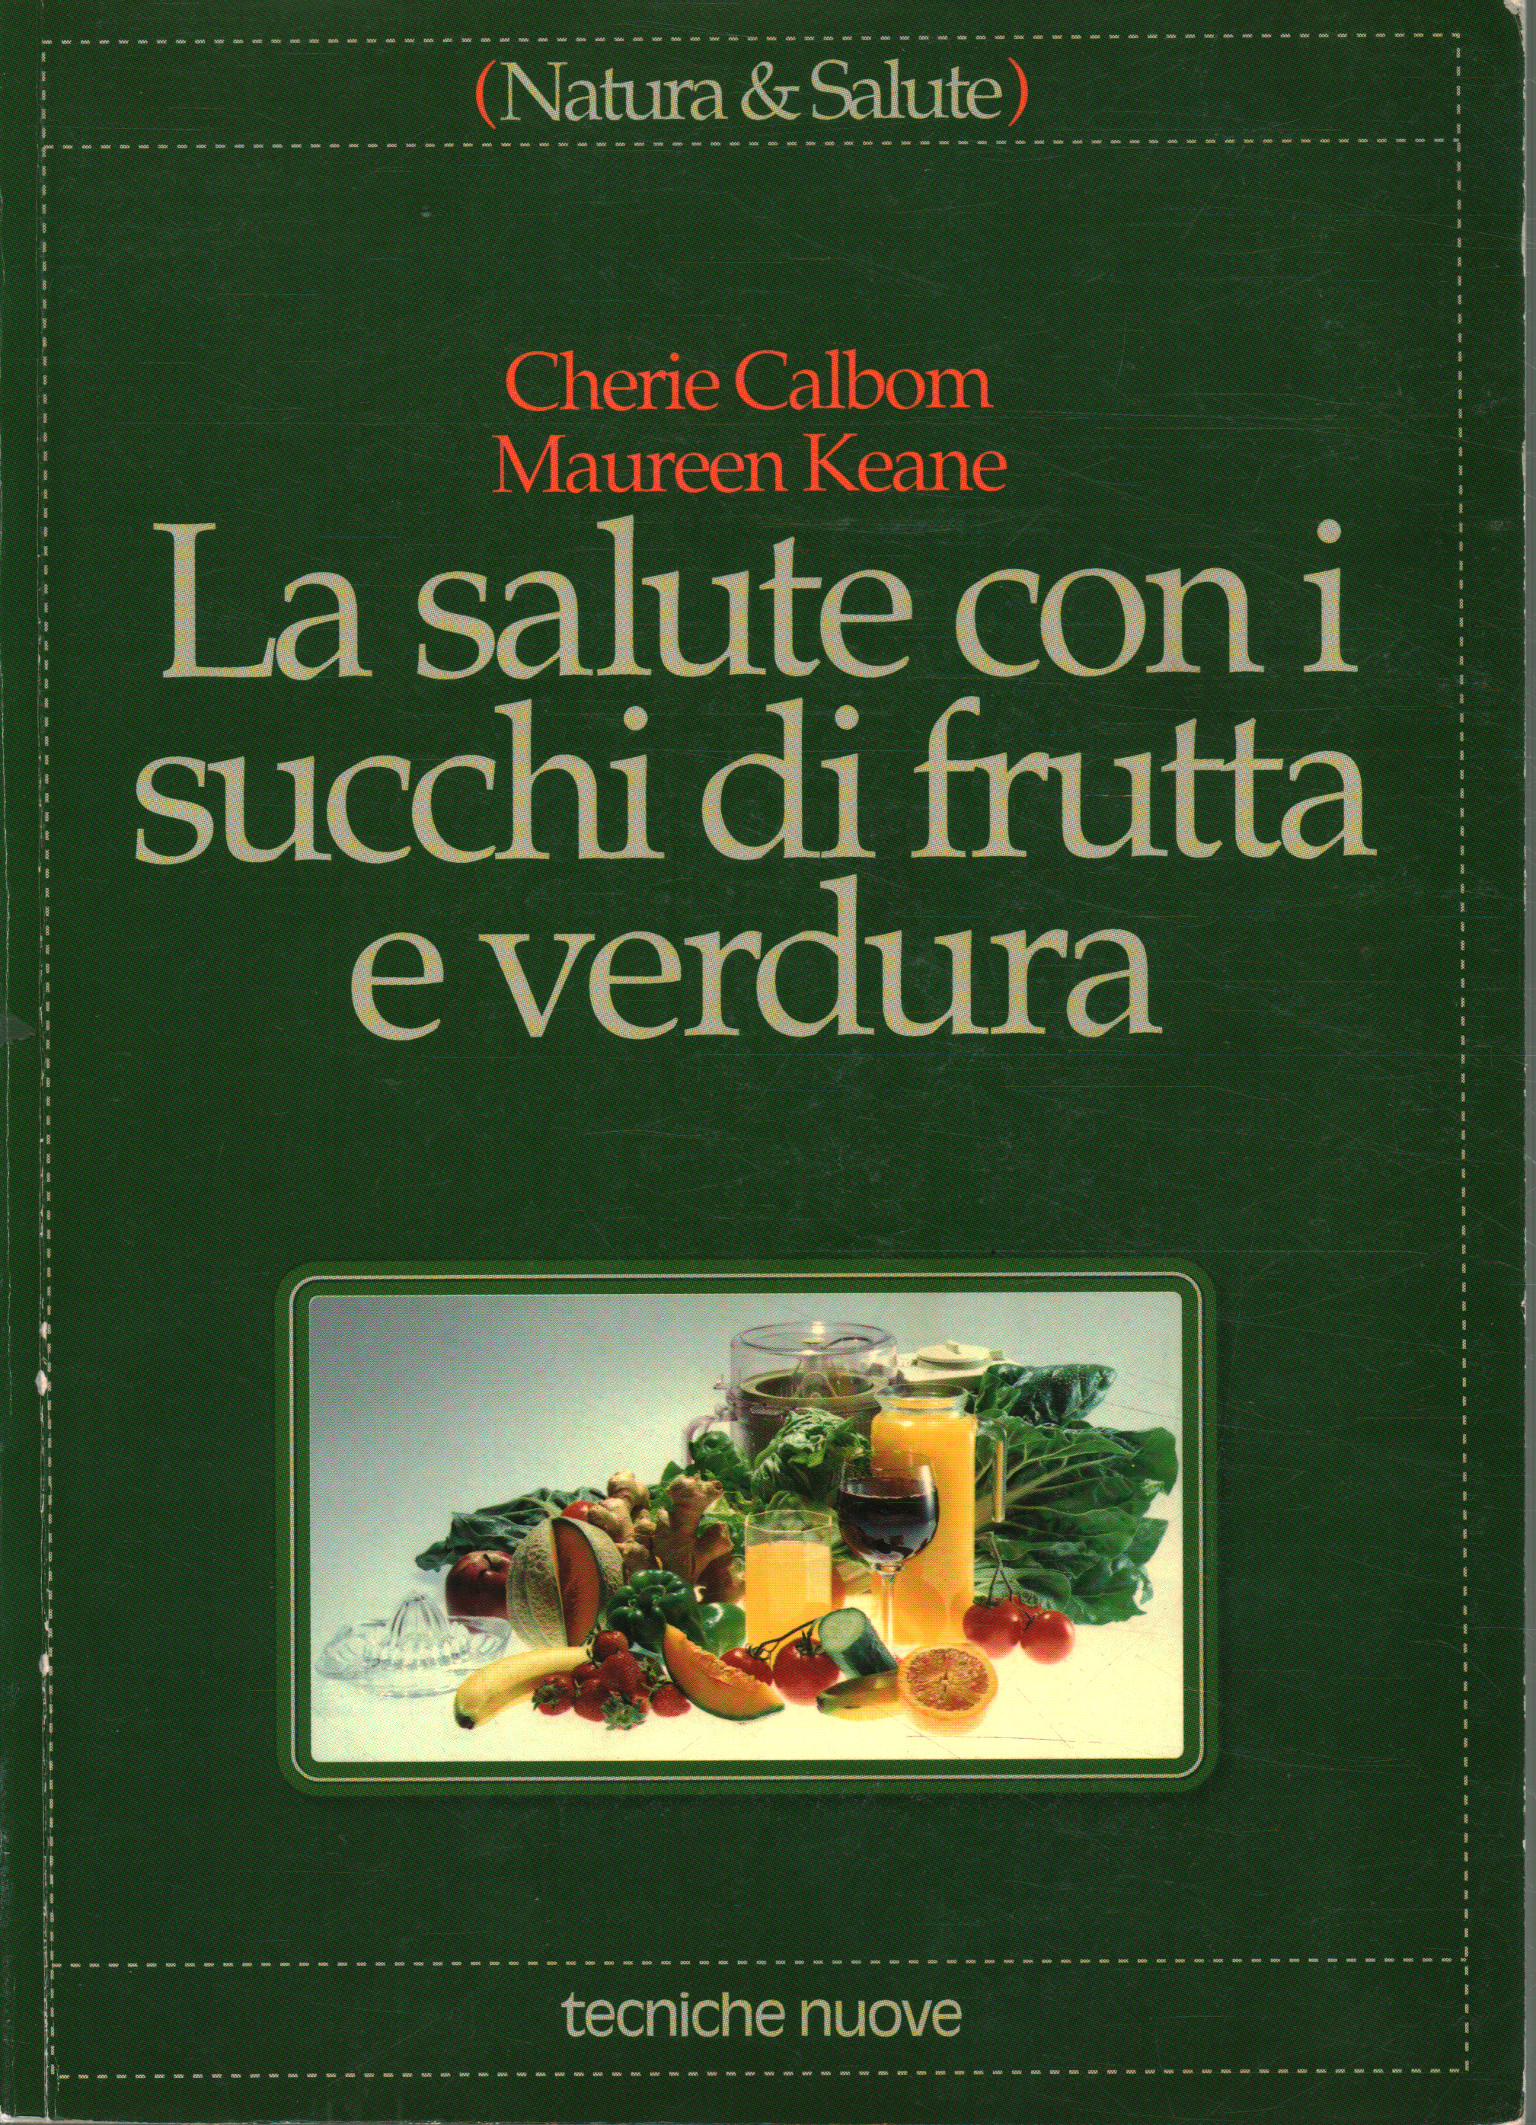 Health with fruit and vegetable juices, Cherie Calbom Maureen Keane